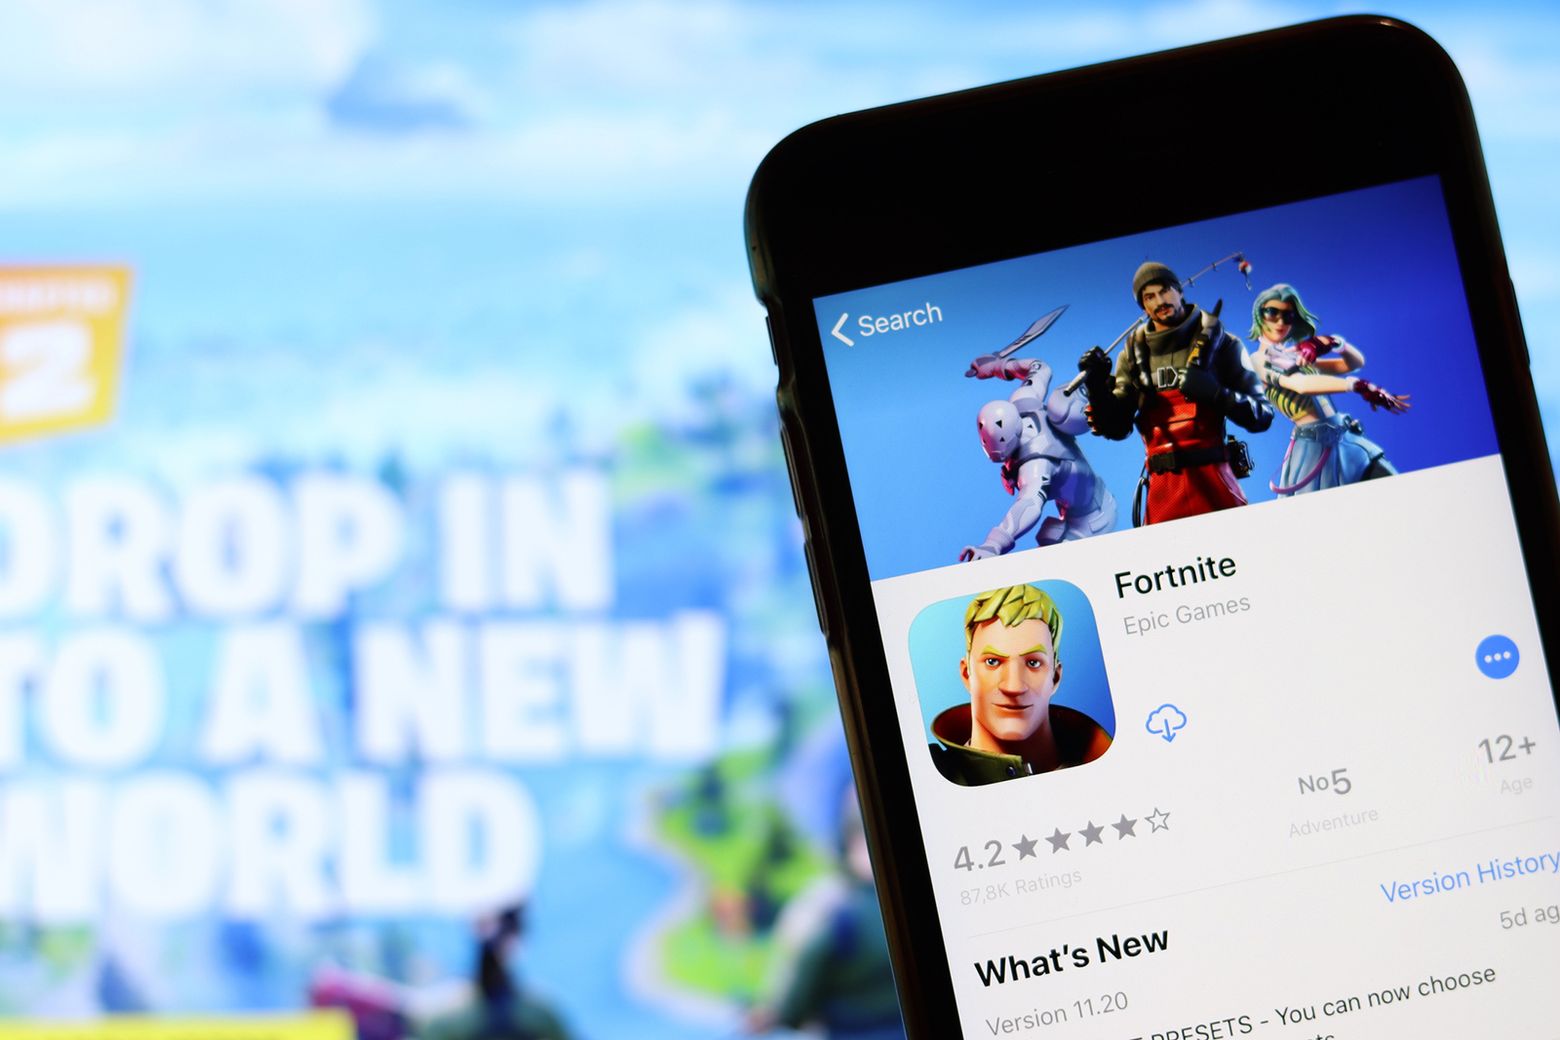 Did Epic win? Apple will have to open up iPhone ecosystem and Fortnite  could return to iOS, report claims